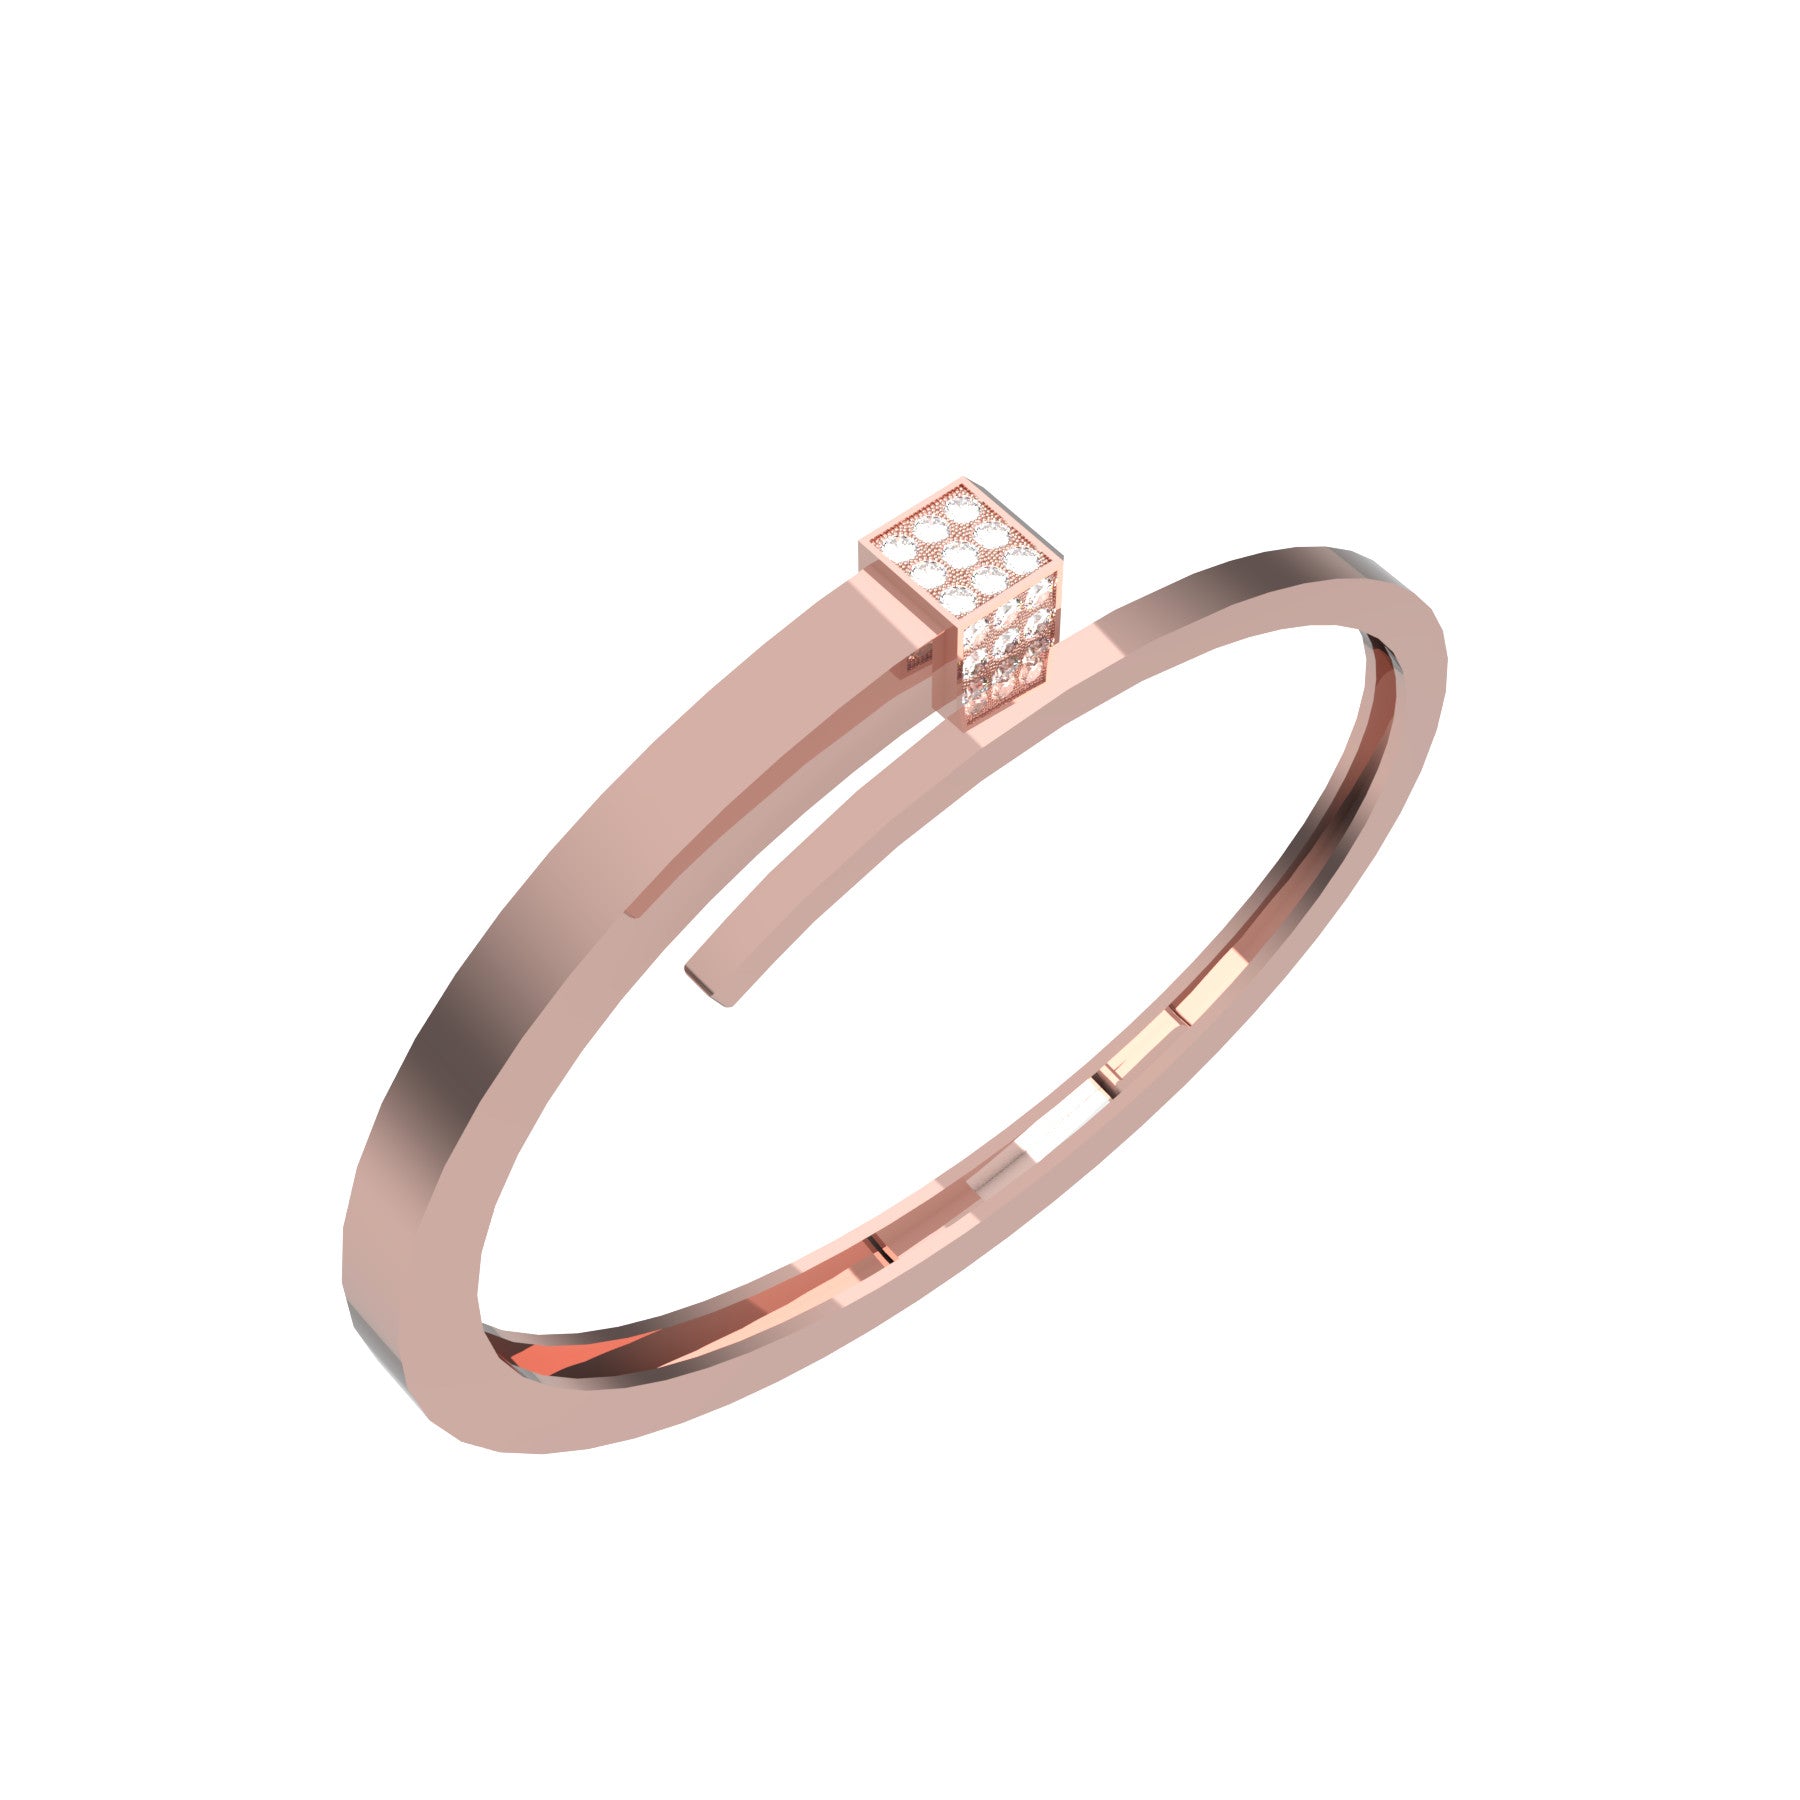 lucky nail bracelet, natural round diamonds, 18 K pink gold, weight about 32,8 to 49,4 g (1.16 to 1.74 oz), width 8 mm max